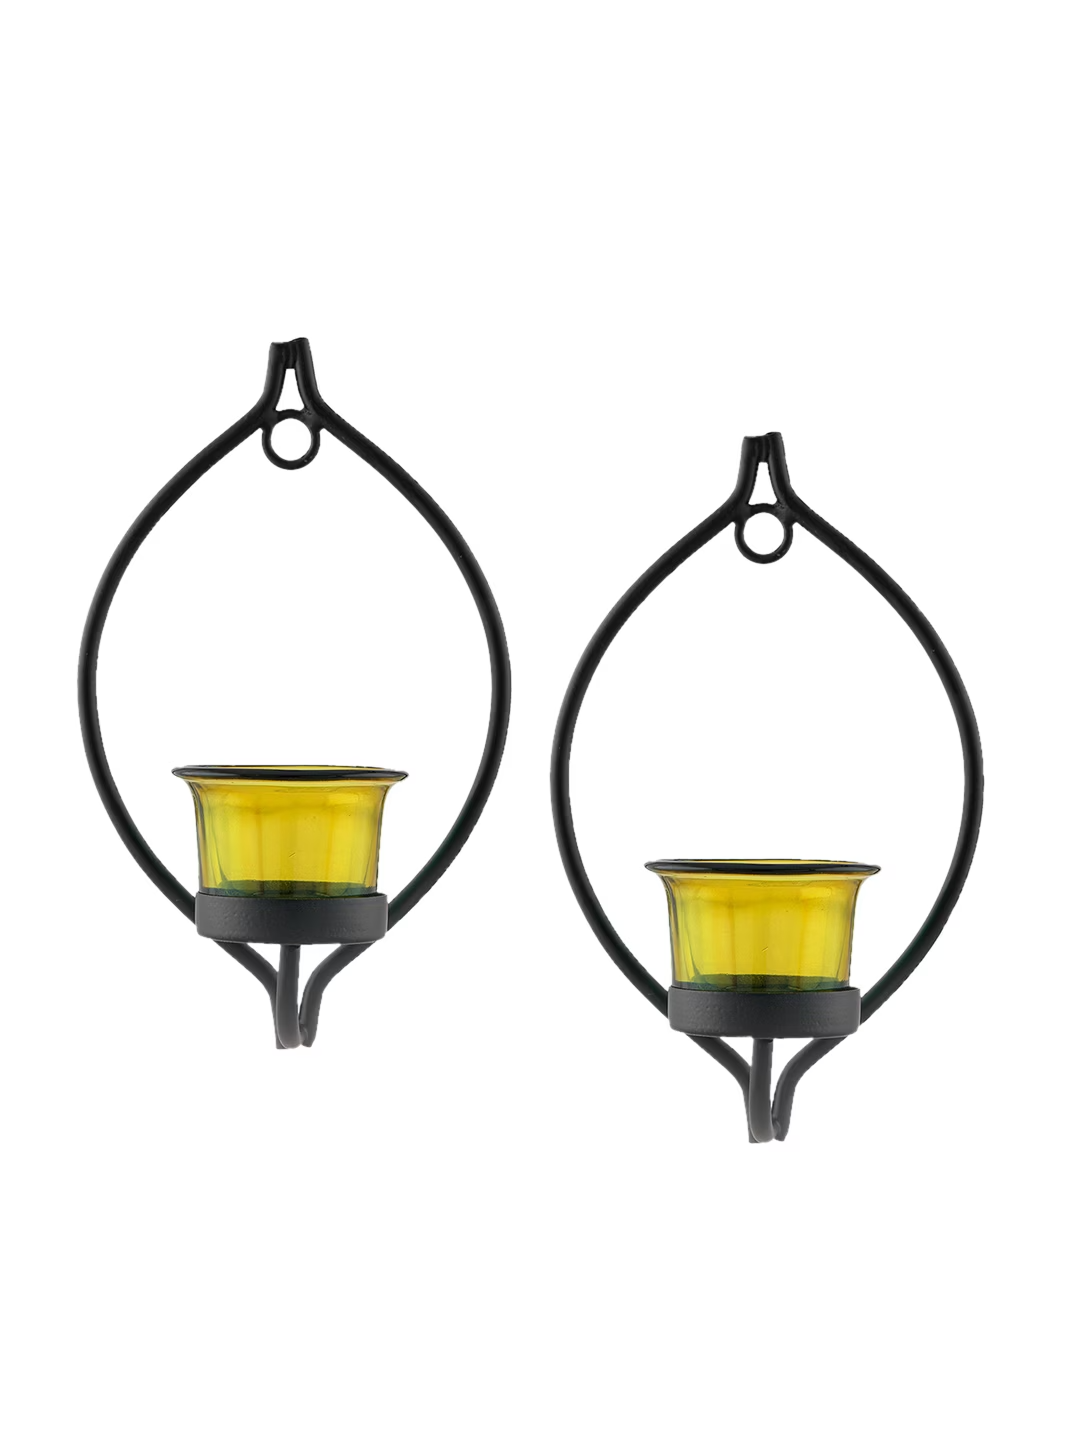 Set of 2 Black & Yellow Candle Holders